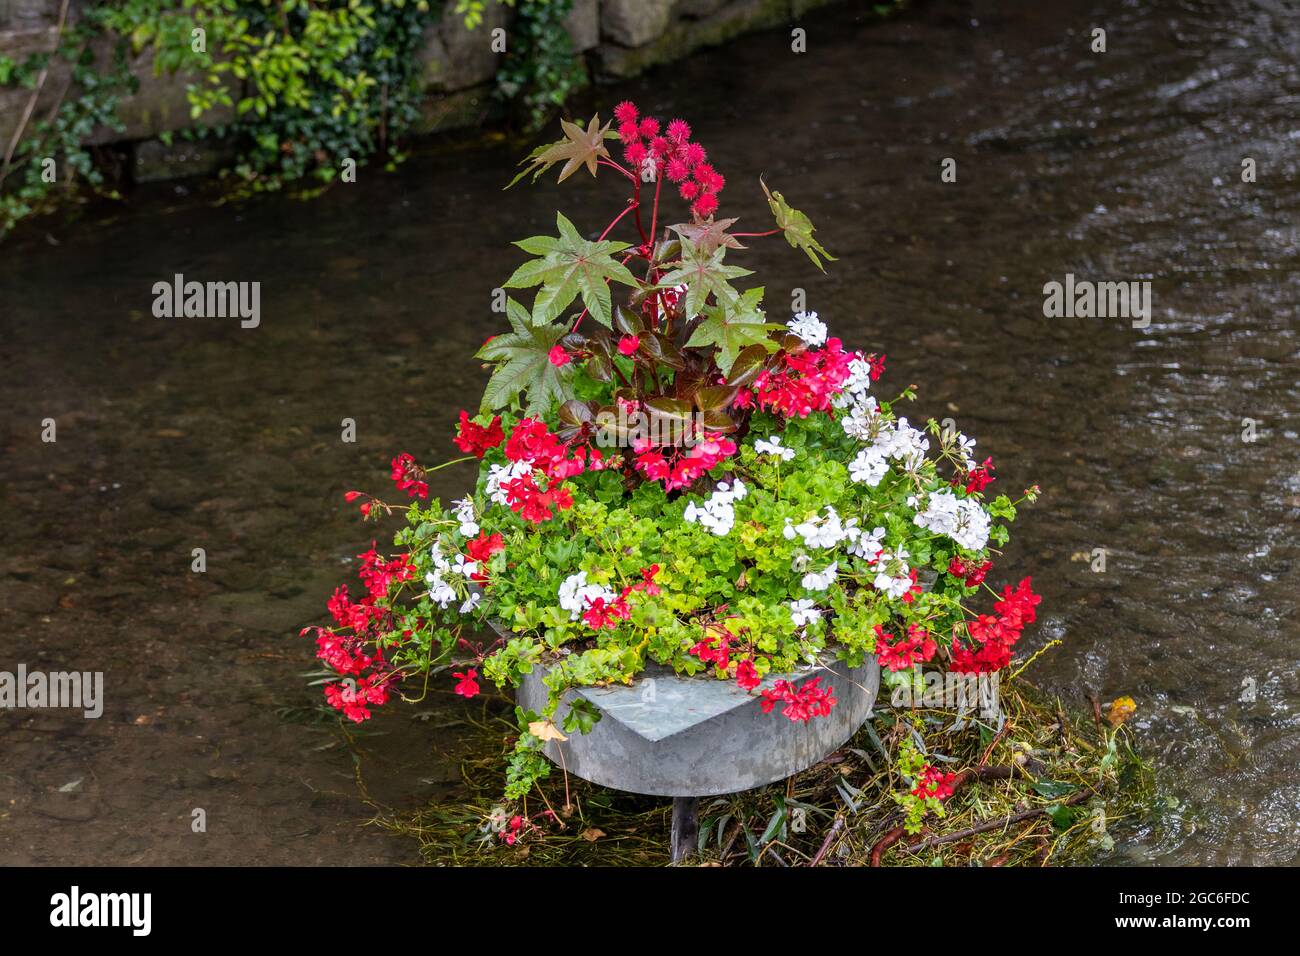 Flower pots with red and white geraniums in the gera river in erfurt, thuringia Stock Photo